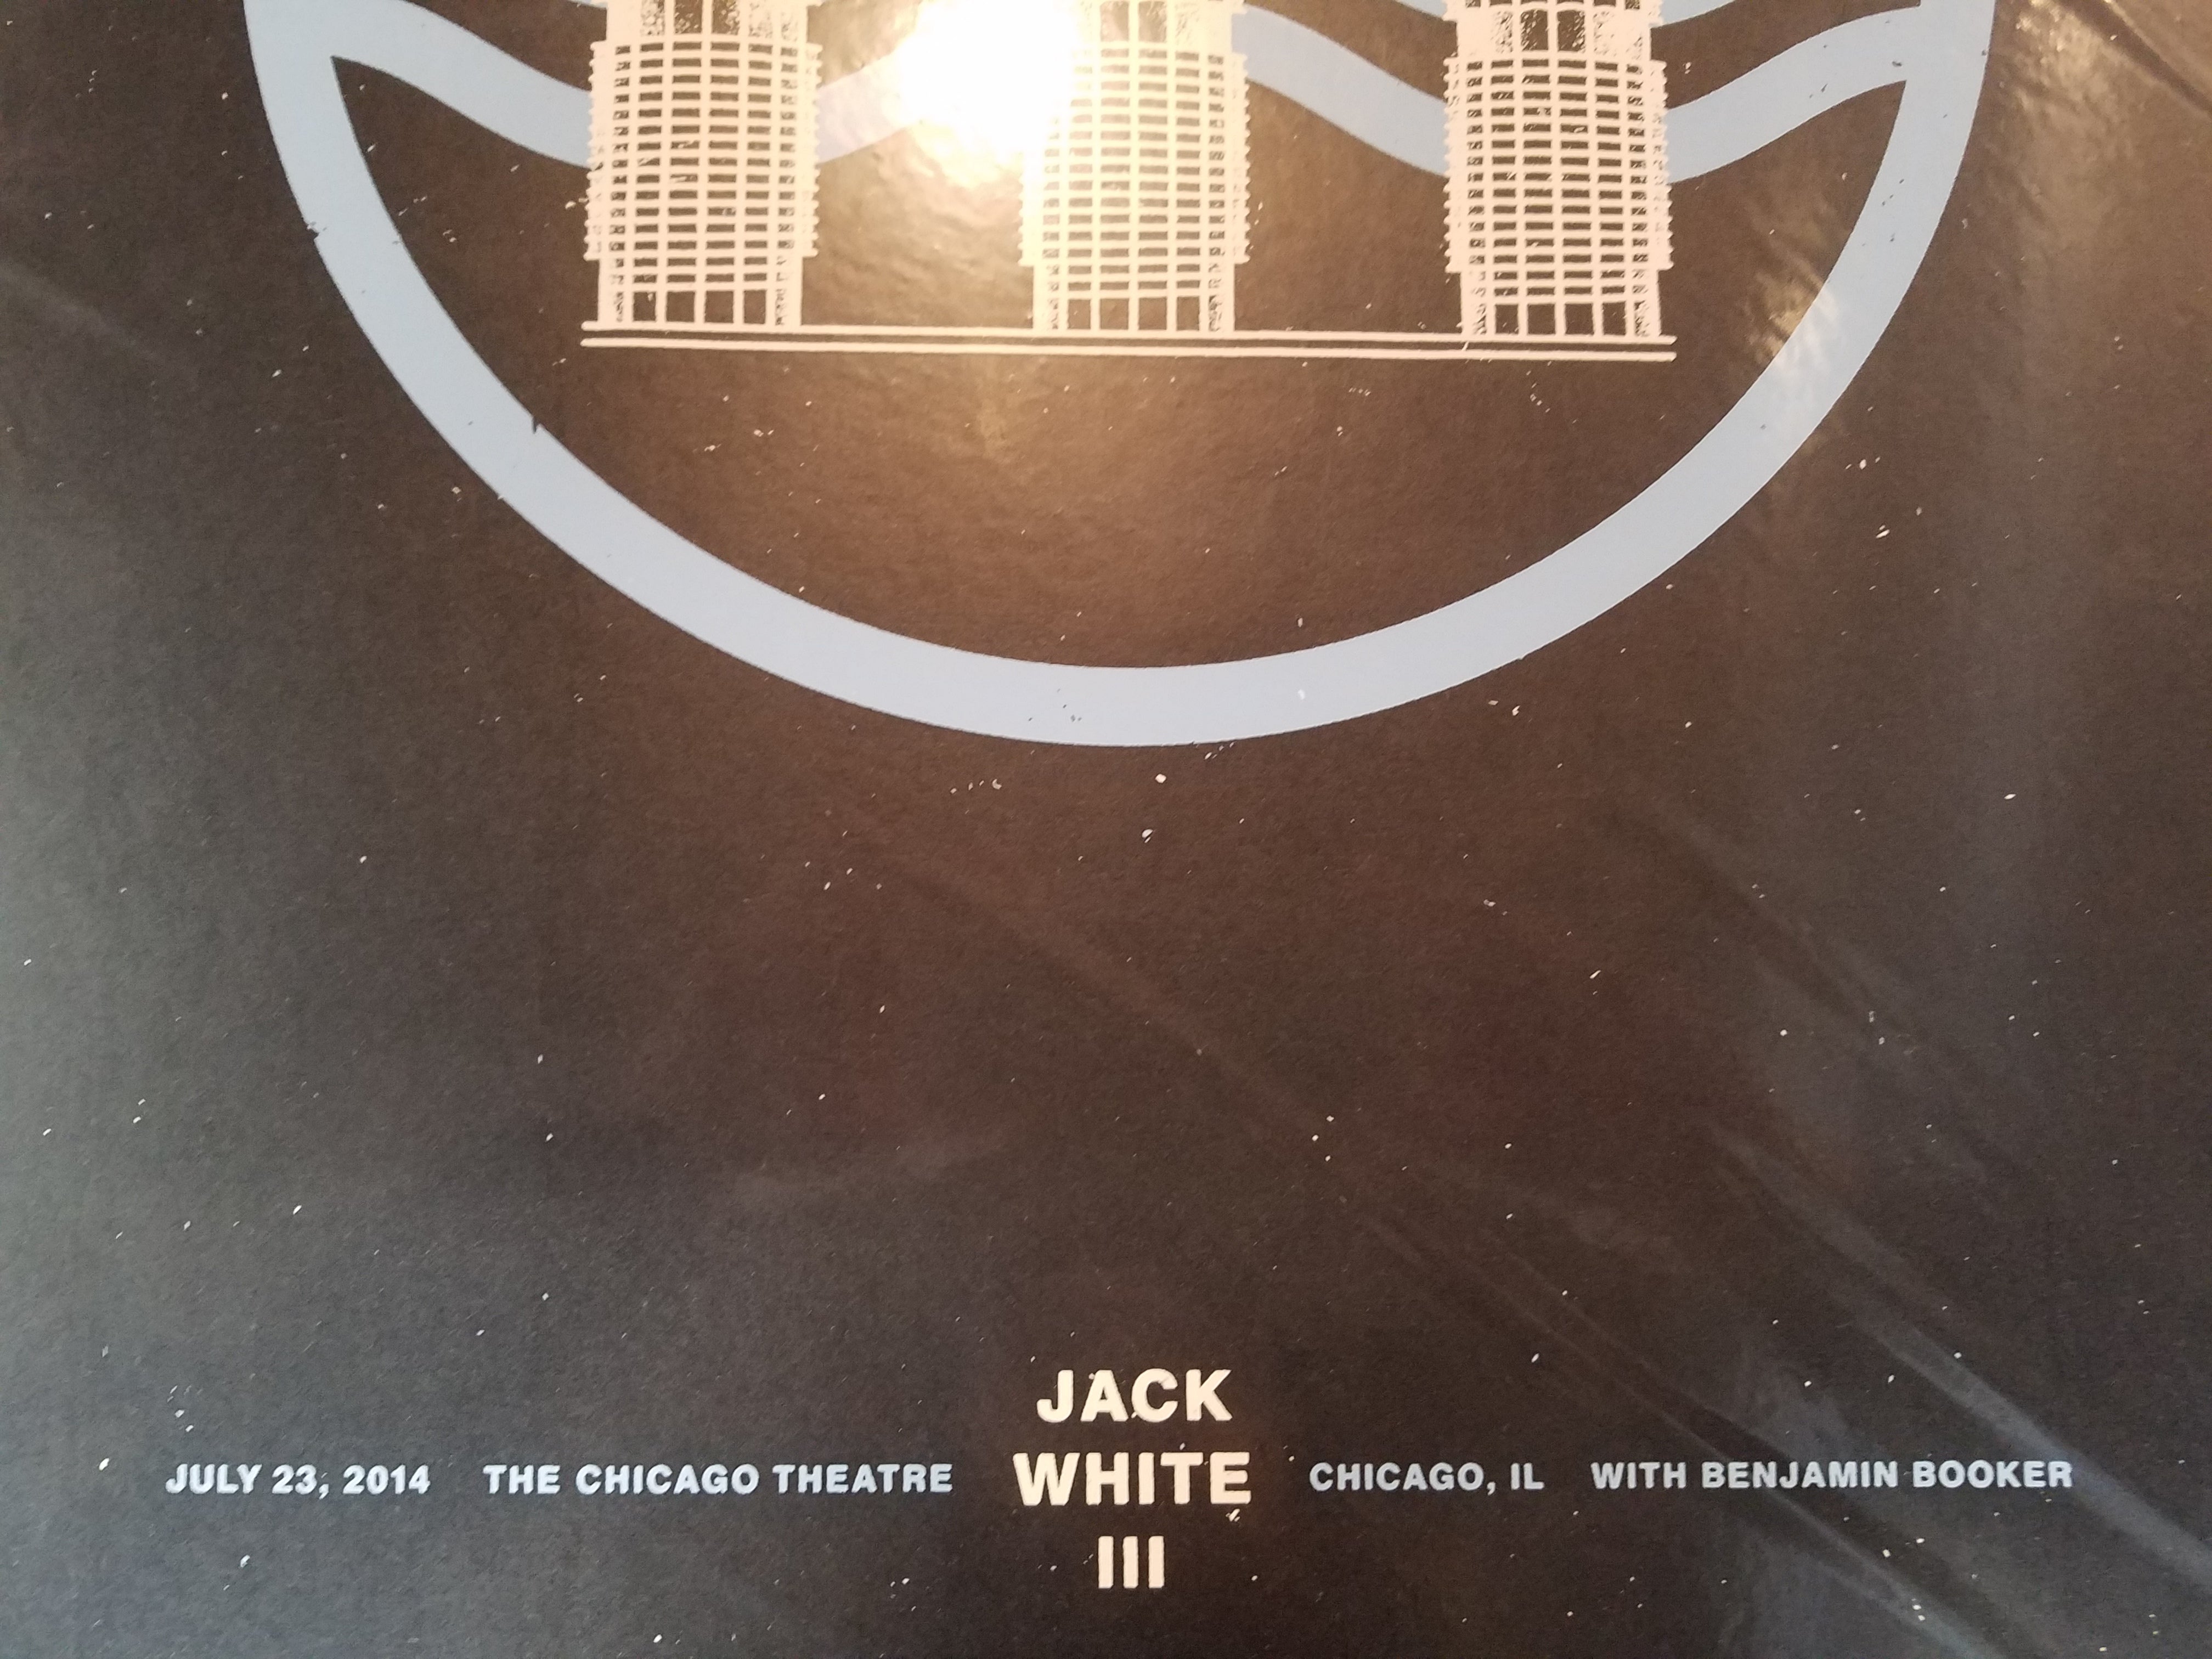 Title:  Jack White - 2014 Chicago Theatre  Poster artist: Matthew Jacobson  Edition:  xx/300  Type: Screen print poster  Size: 24" x 18"  Notes:  Jack White III with Benjamin Booker released in 2014. Unsigned, hand numbered.  Check out our other listings for more hard-to-find and out-of-print posters.